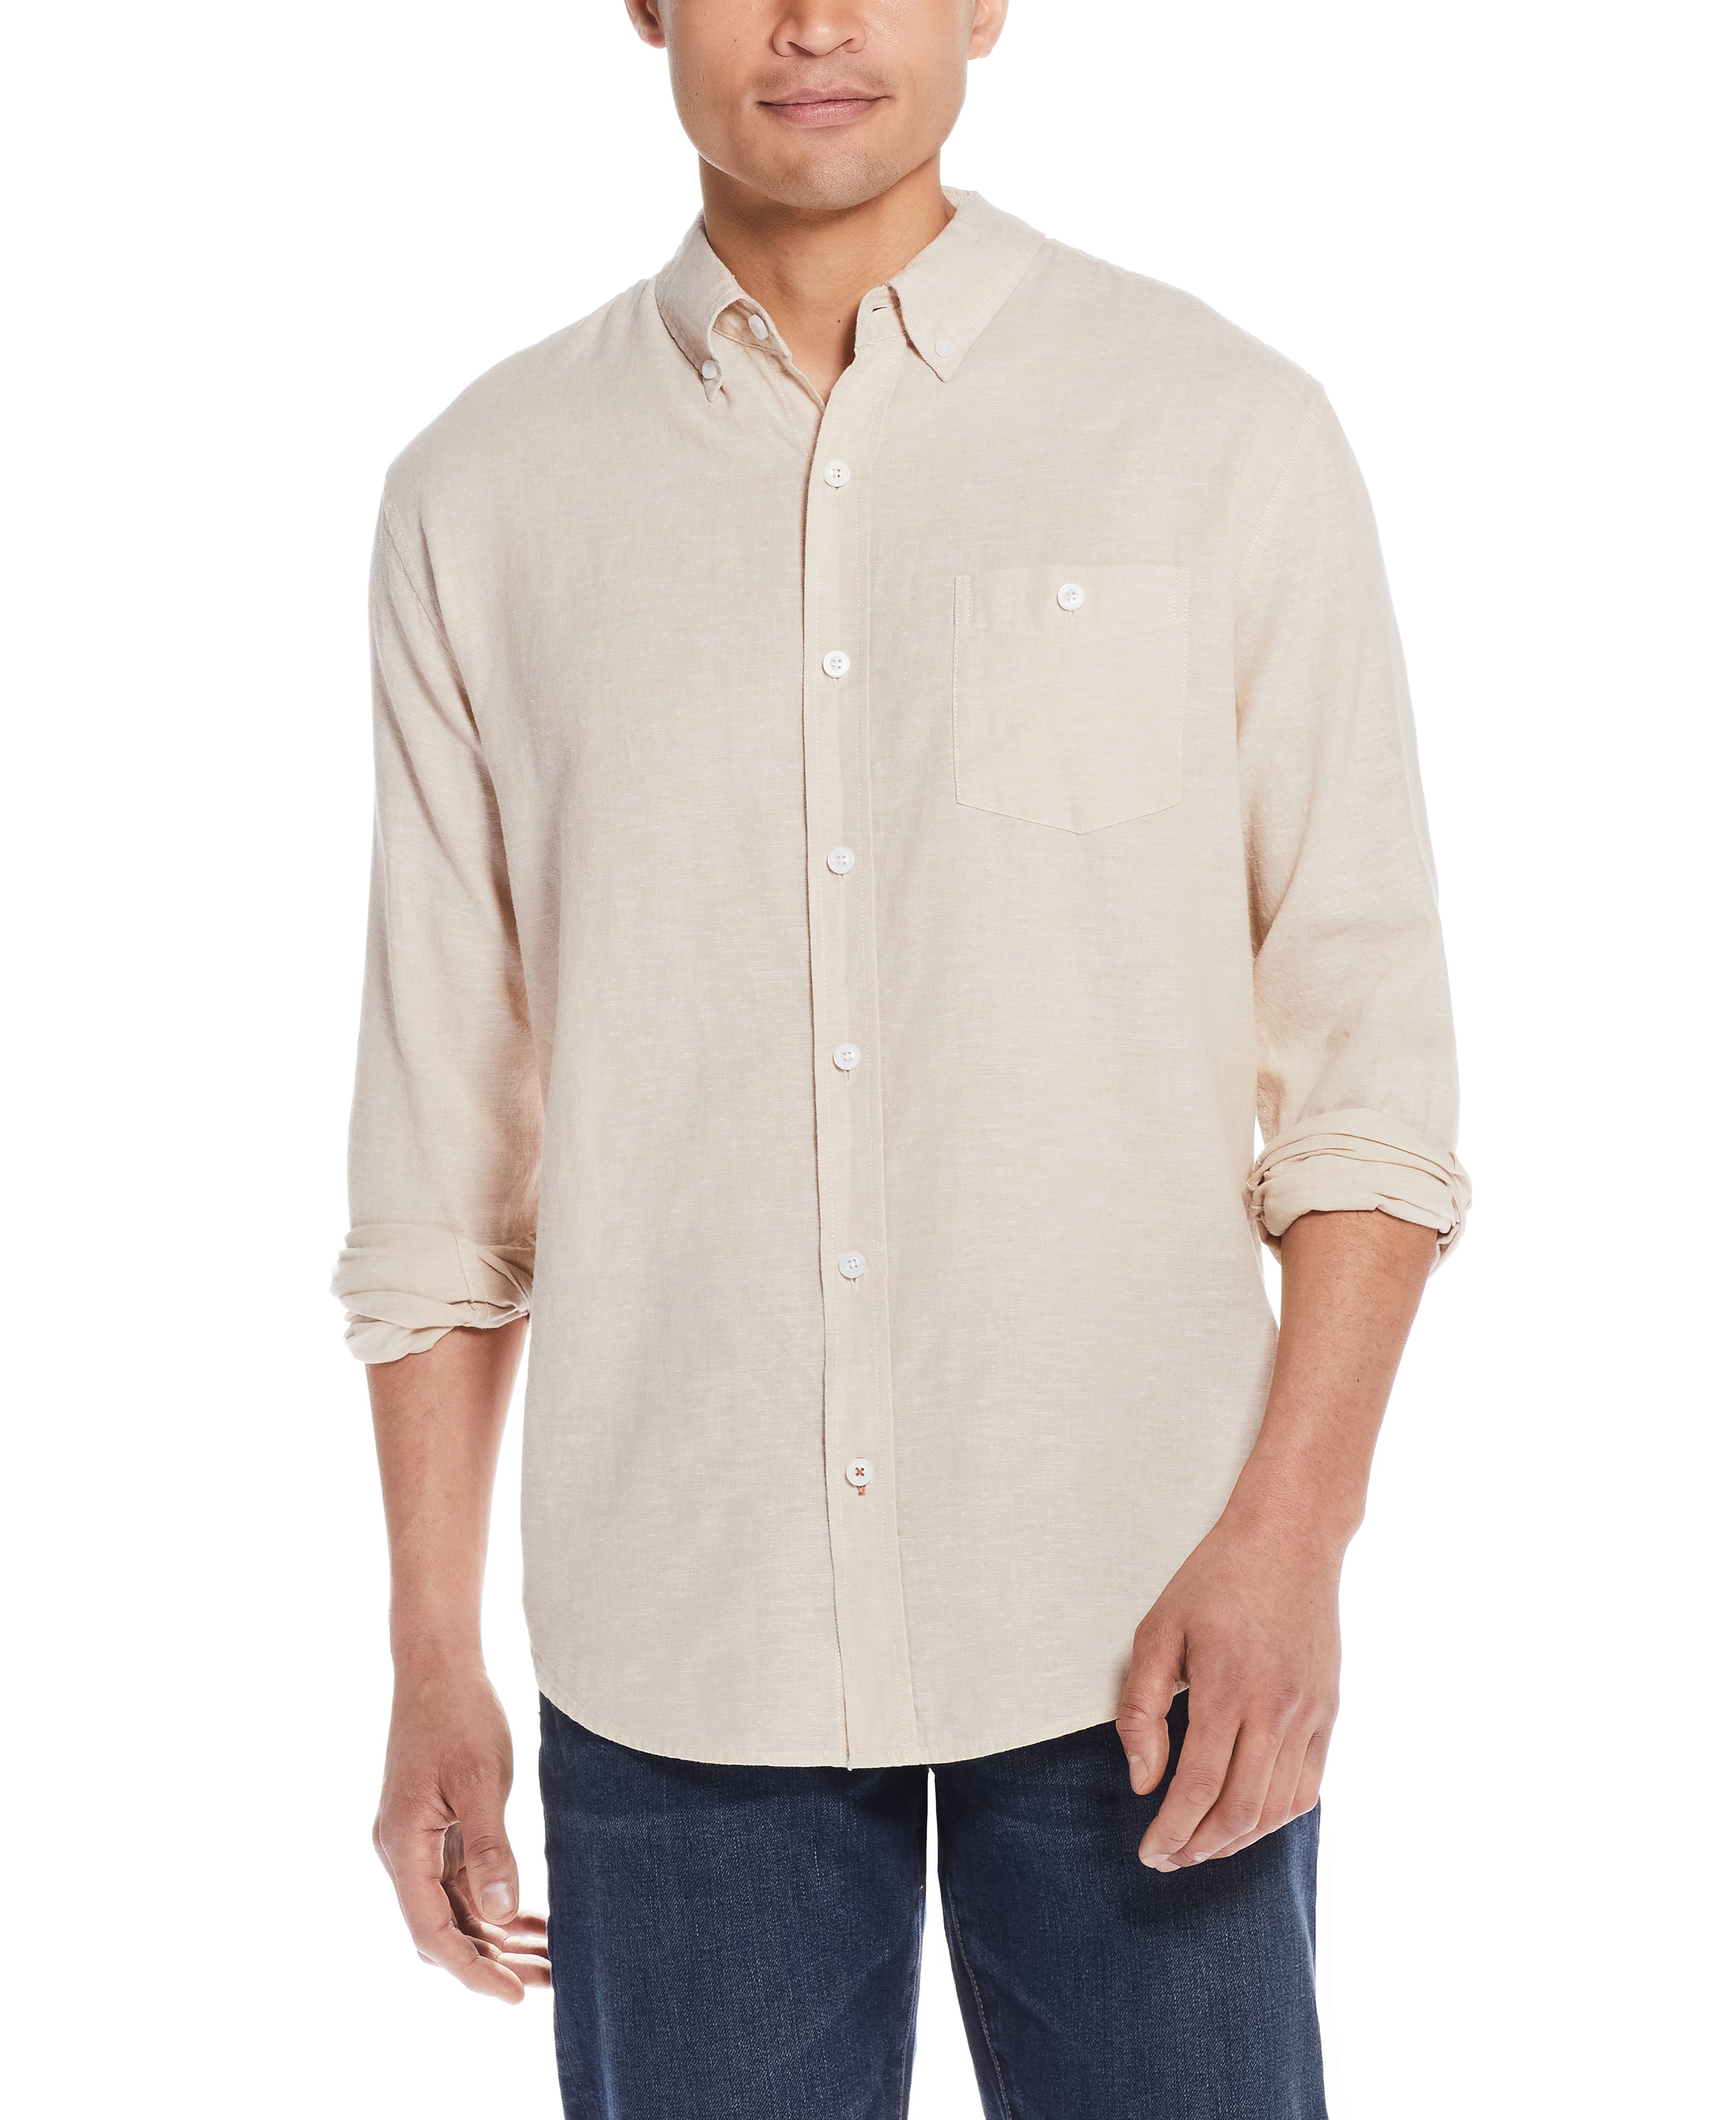 Long Sleeve Linen Cotton Shirt in Nomad